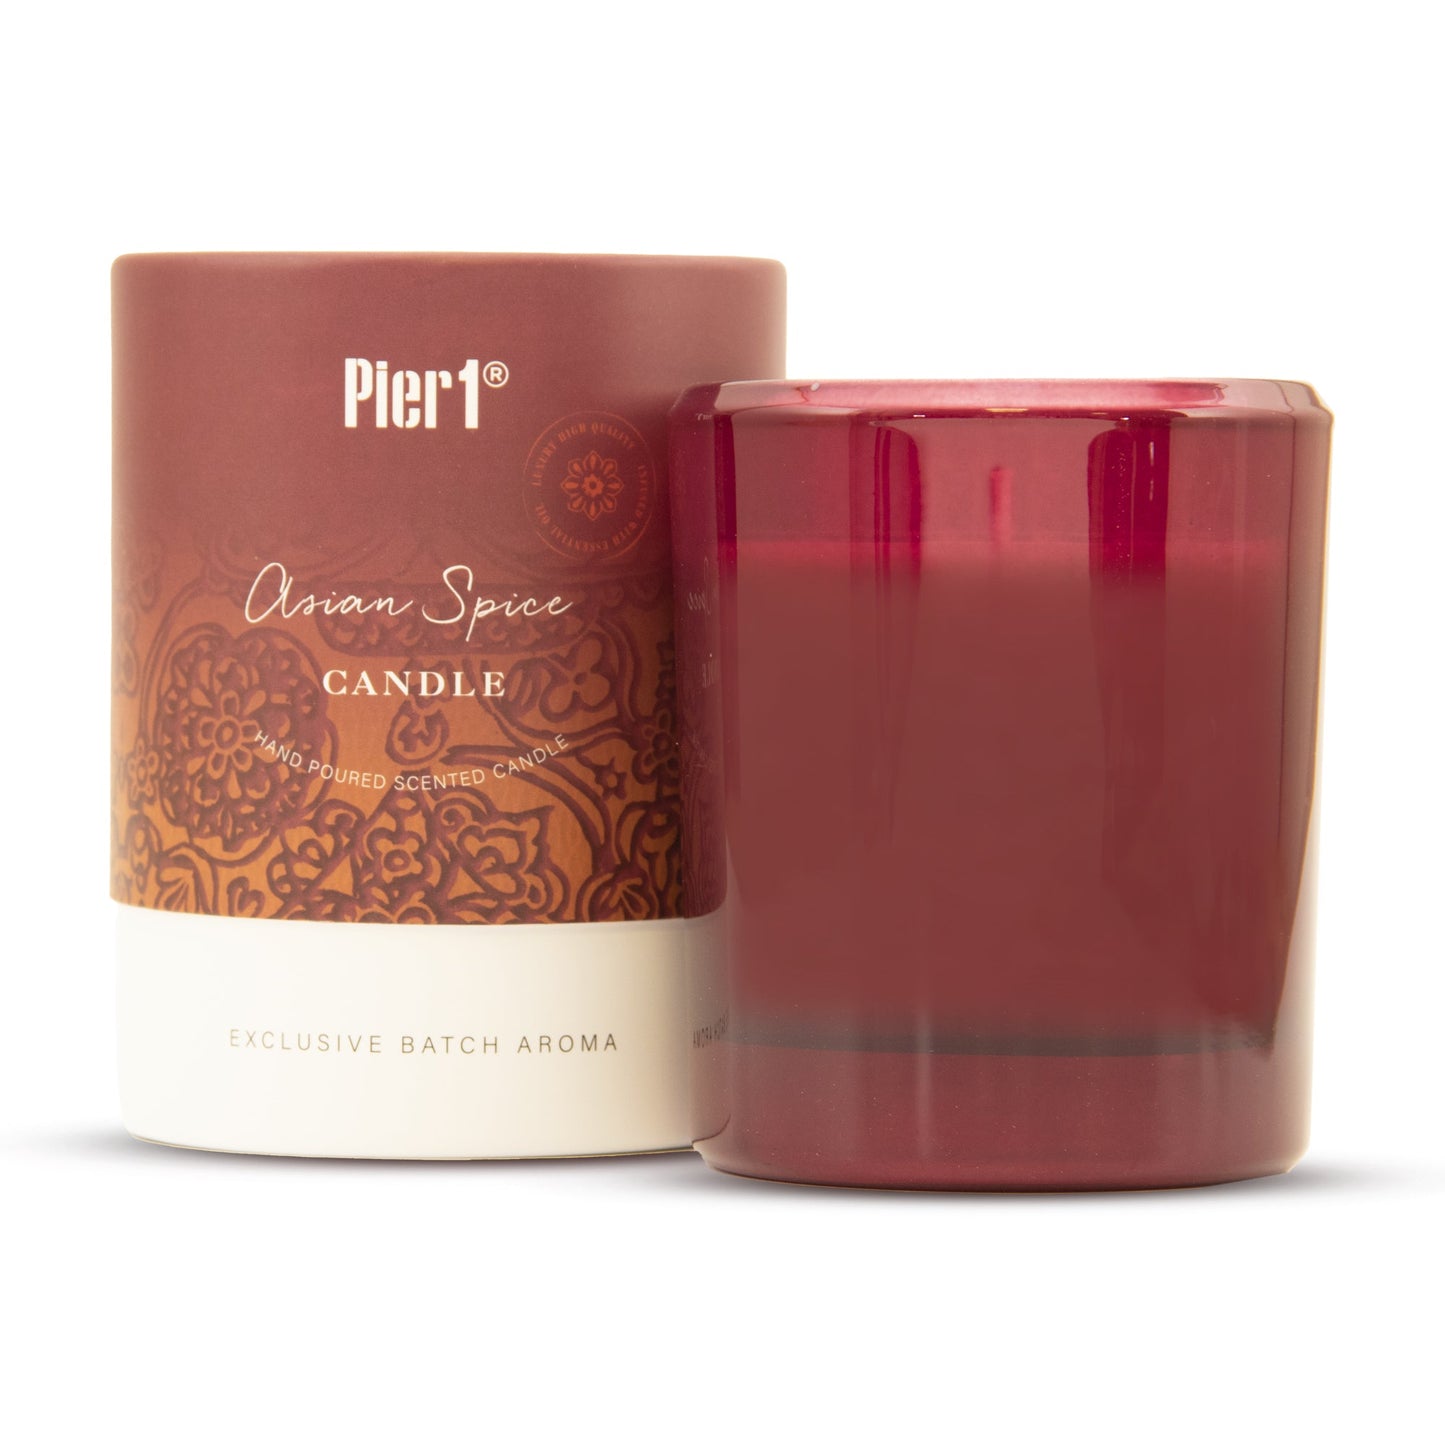 Pier 1 Asian Spice Boxed Soy Candle 8oz - The Home Resolution